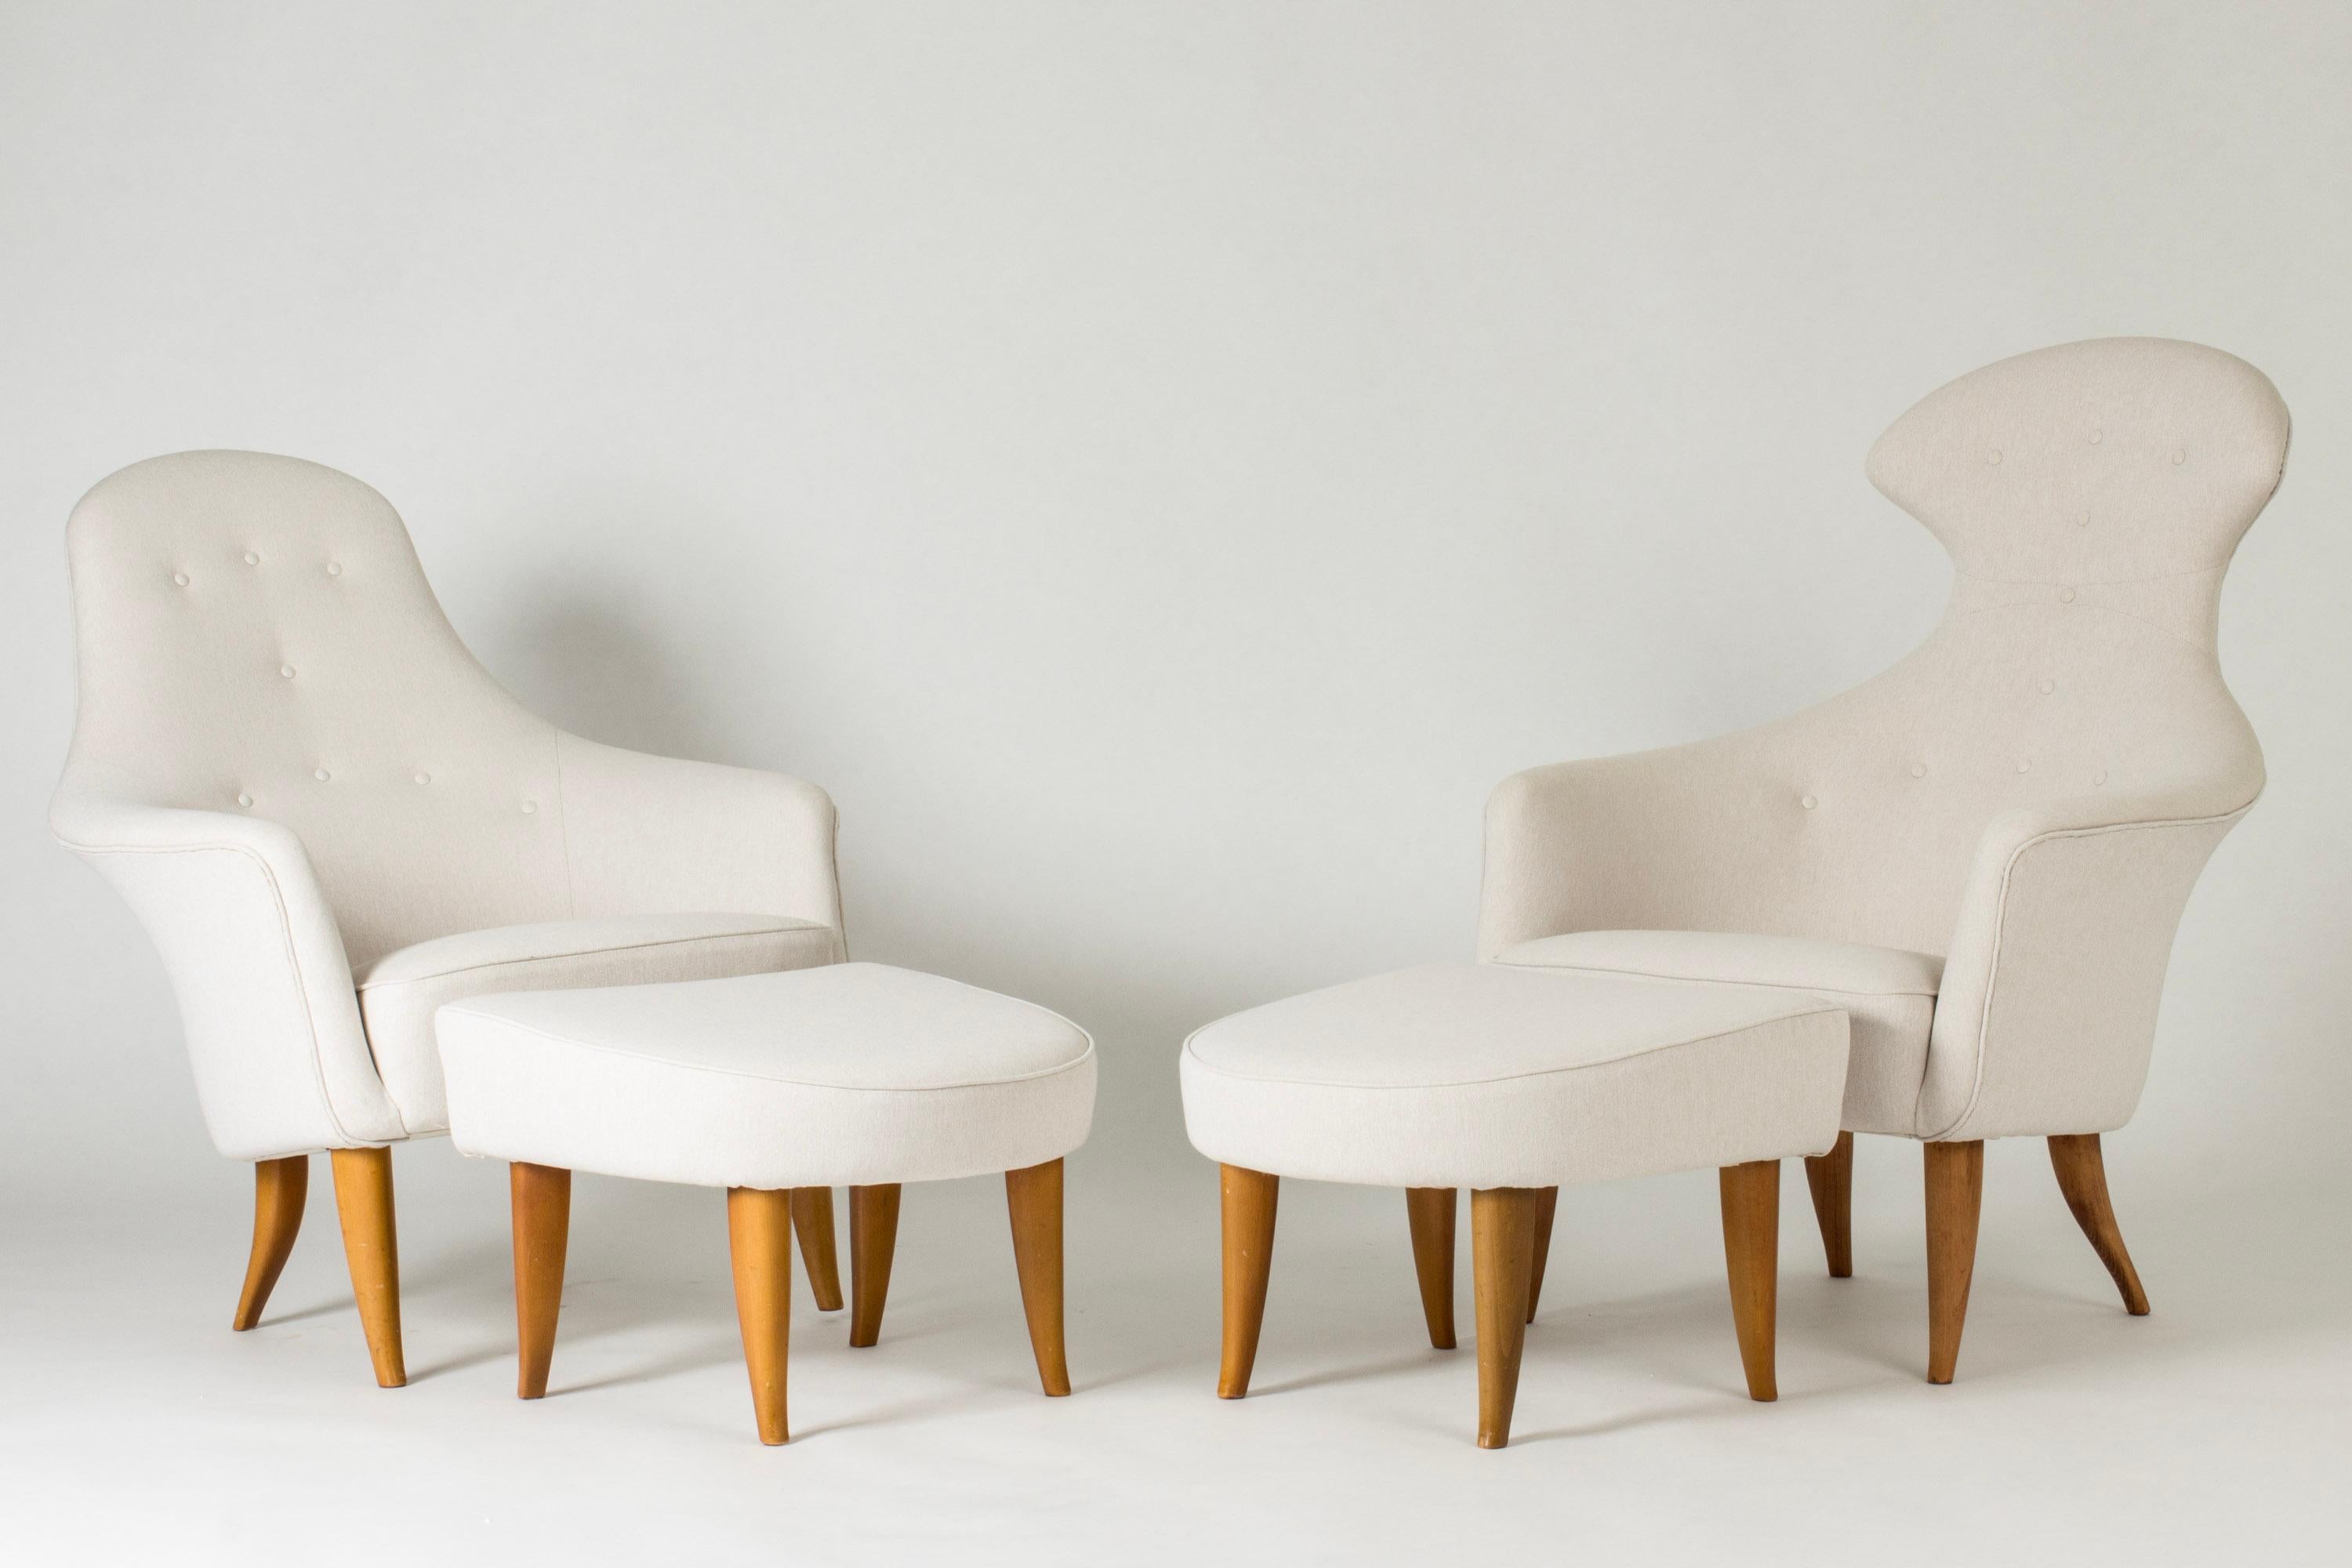 Stunning pair of “Big Adam” (“Stora Adam”) and “Big Eve” (“Stora Eva”) lounge chairs with footstools by Kerstin Hörlin-Holmquist, from the “Paradis” series. Upholstered with crisp white linen fabric. 

The “Paradis” series was introduced in 1958 as